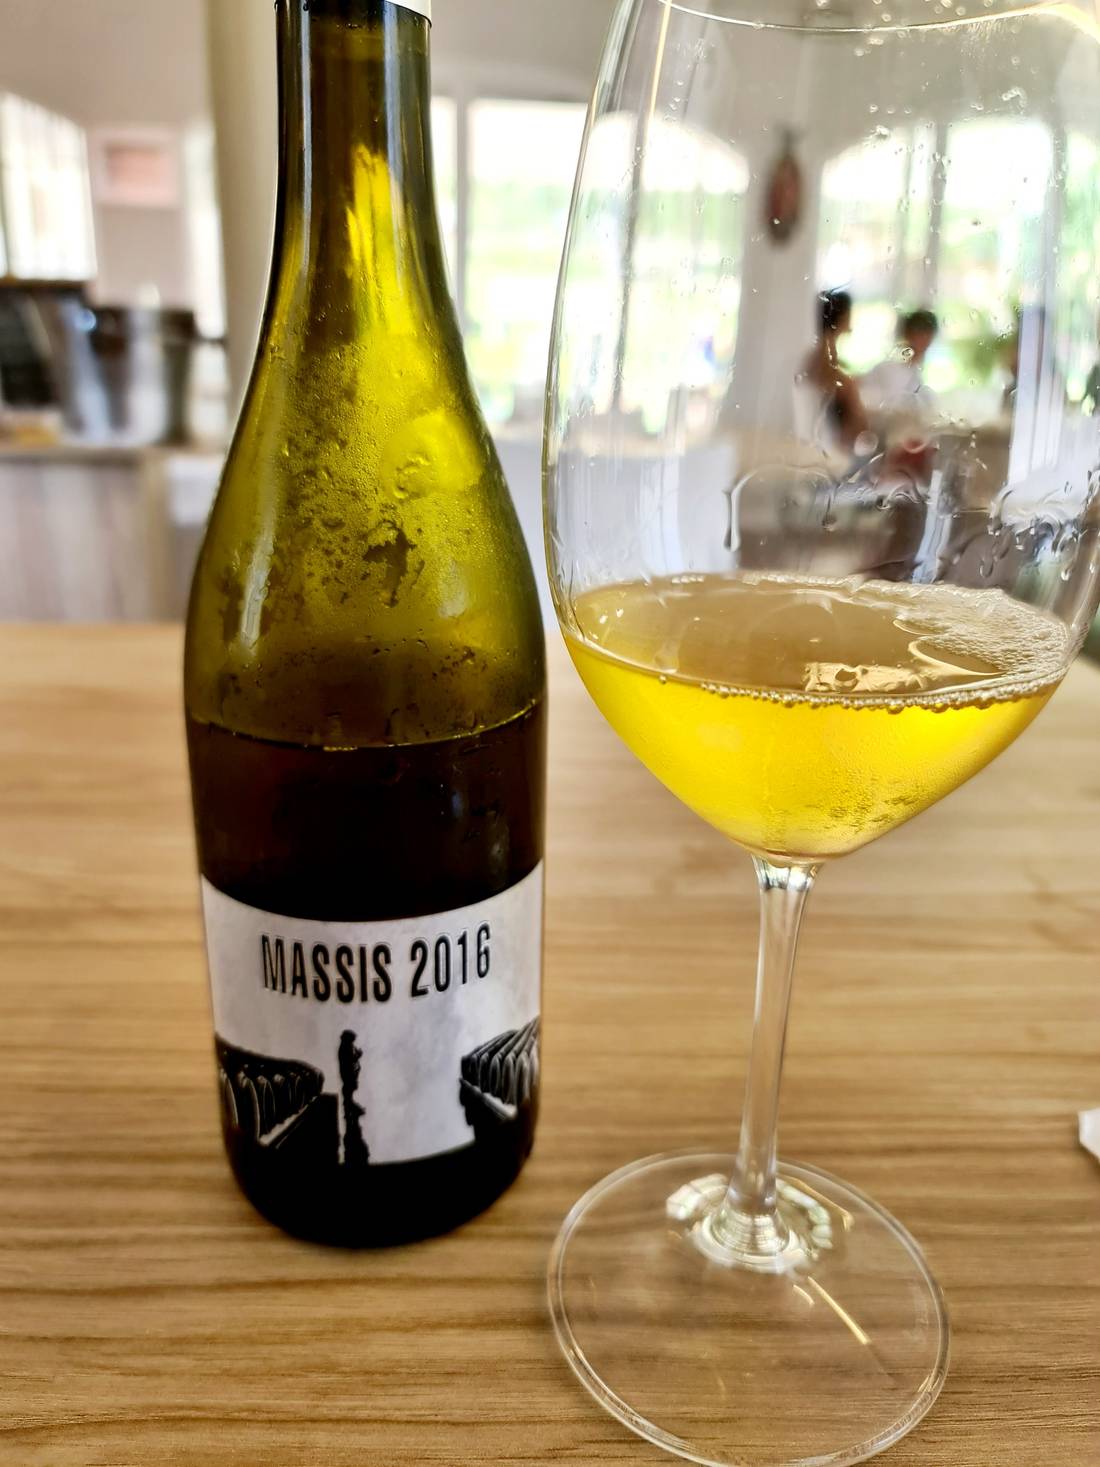 Catalan white wine made of 50% Garnatxa Blanca and 50% Xarel.lo grapes by Contador winery - Fresh with a touch of oak, citrus, passionfruit, melon and butter - Mineral, high intensity and full on the palate (€3.95/glass, on the house).